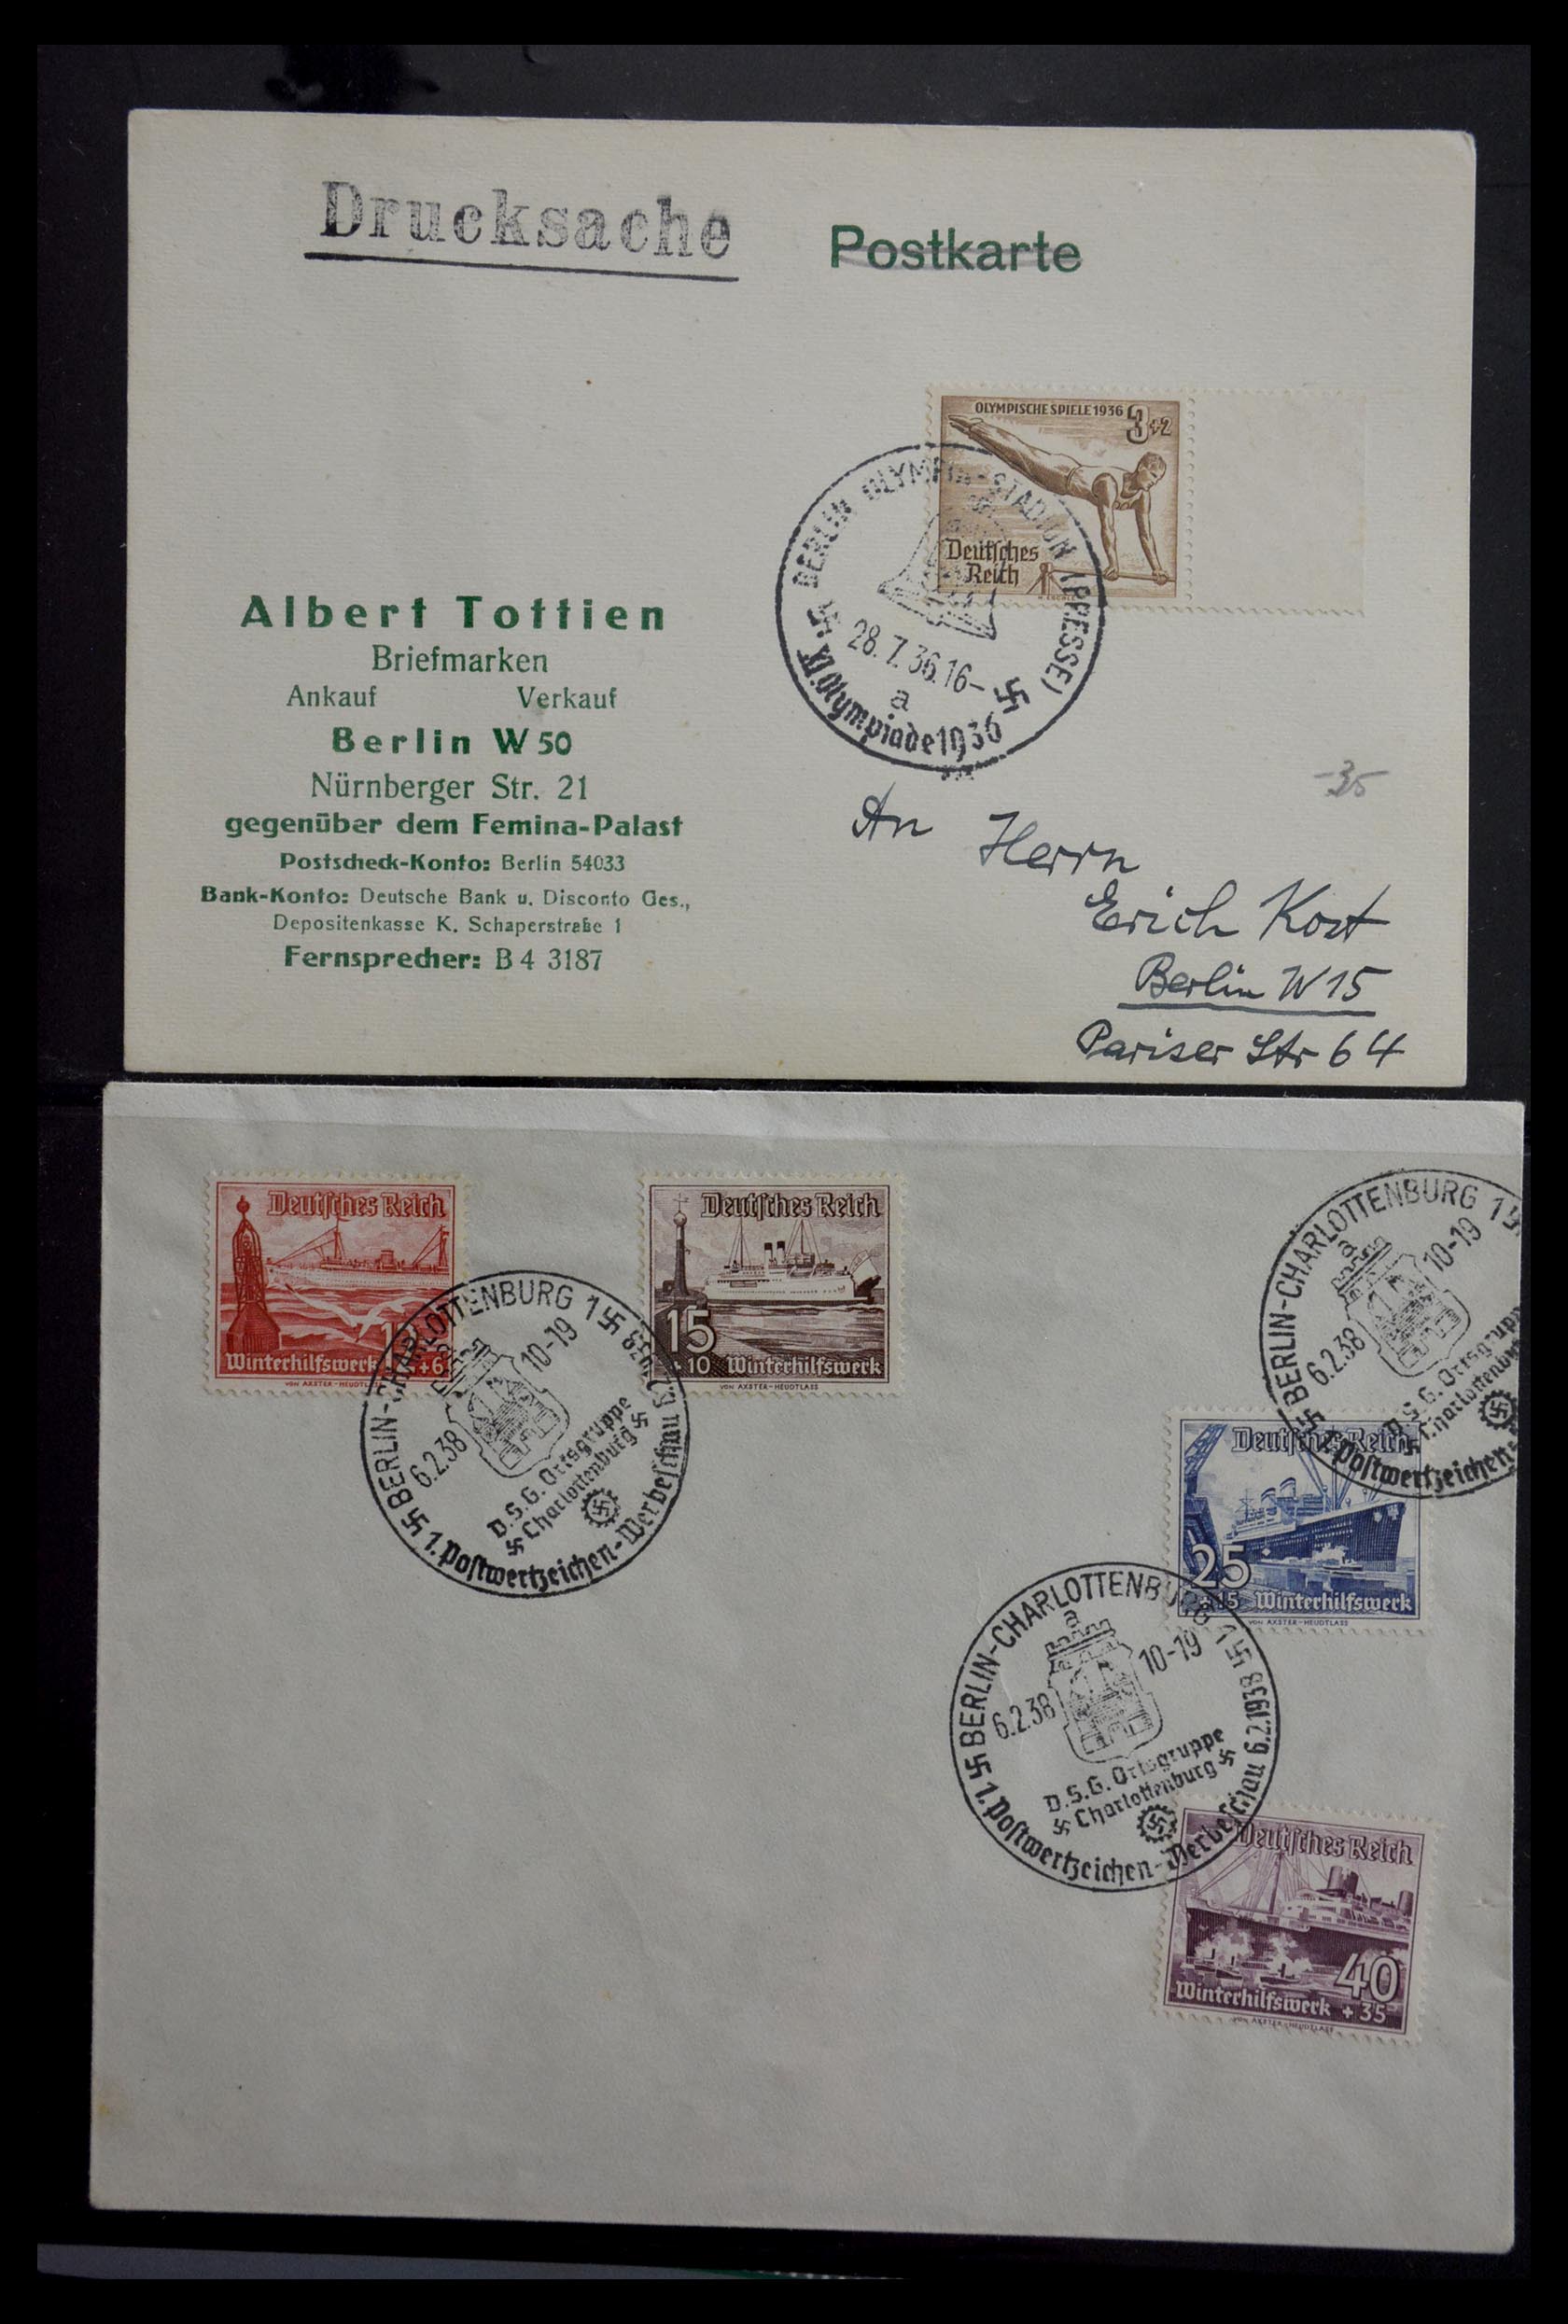 29382 001 - 29382 Germany covers and FDC's 1936-1965.